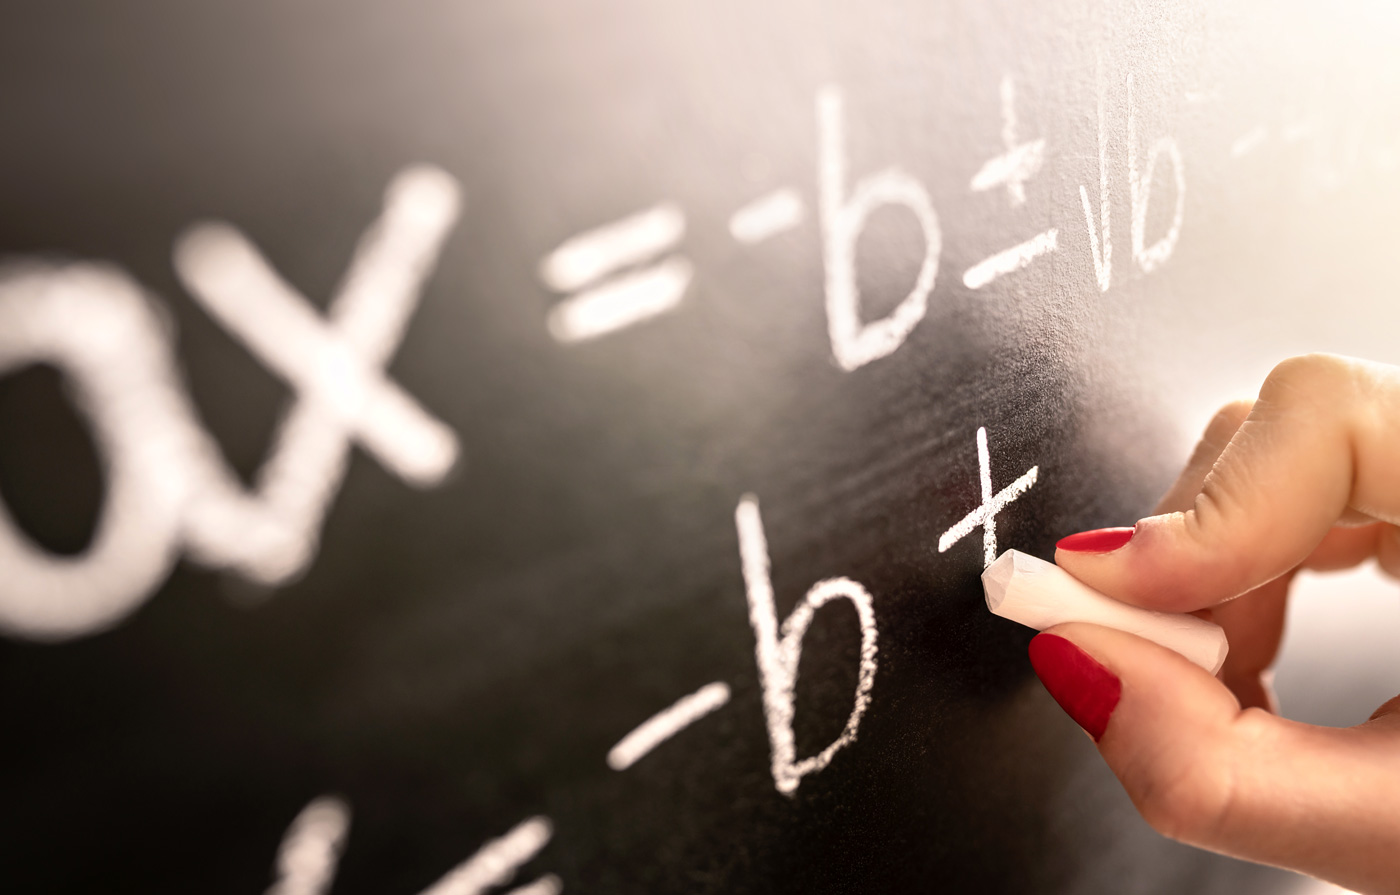 A person with red nails writes algebra equations on a chalkboard with a white piece of chalk